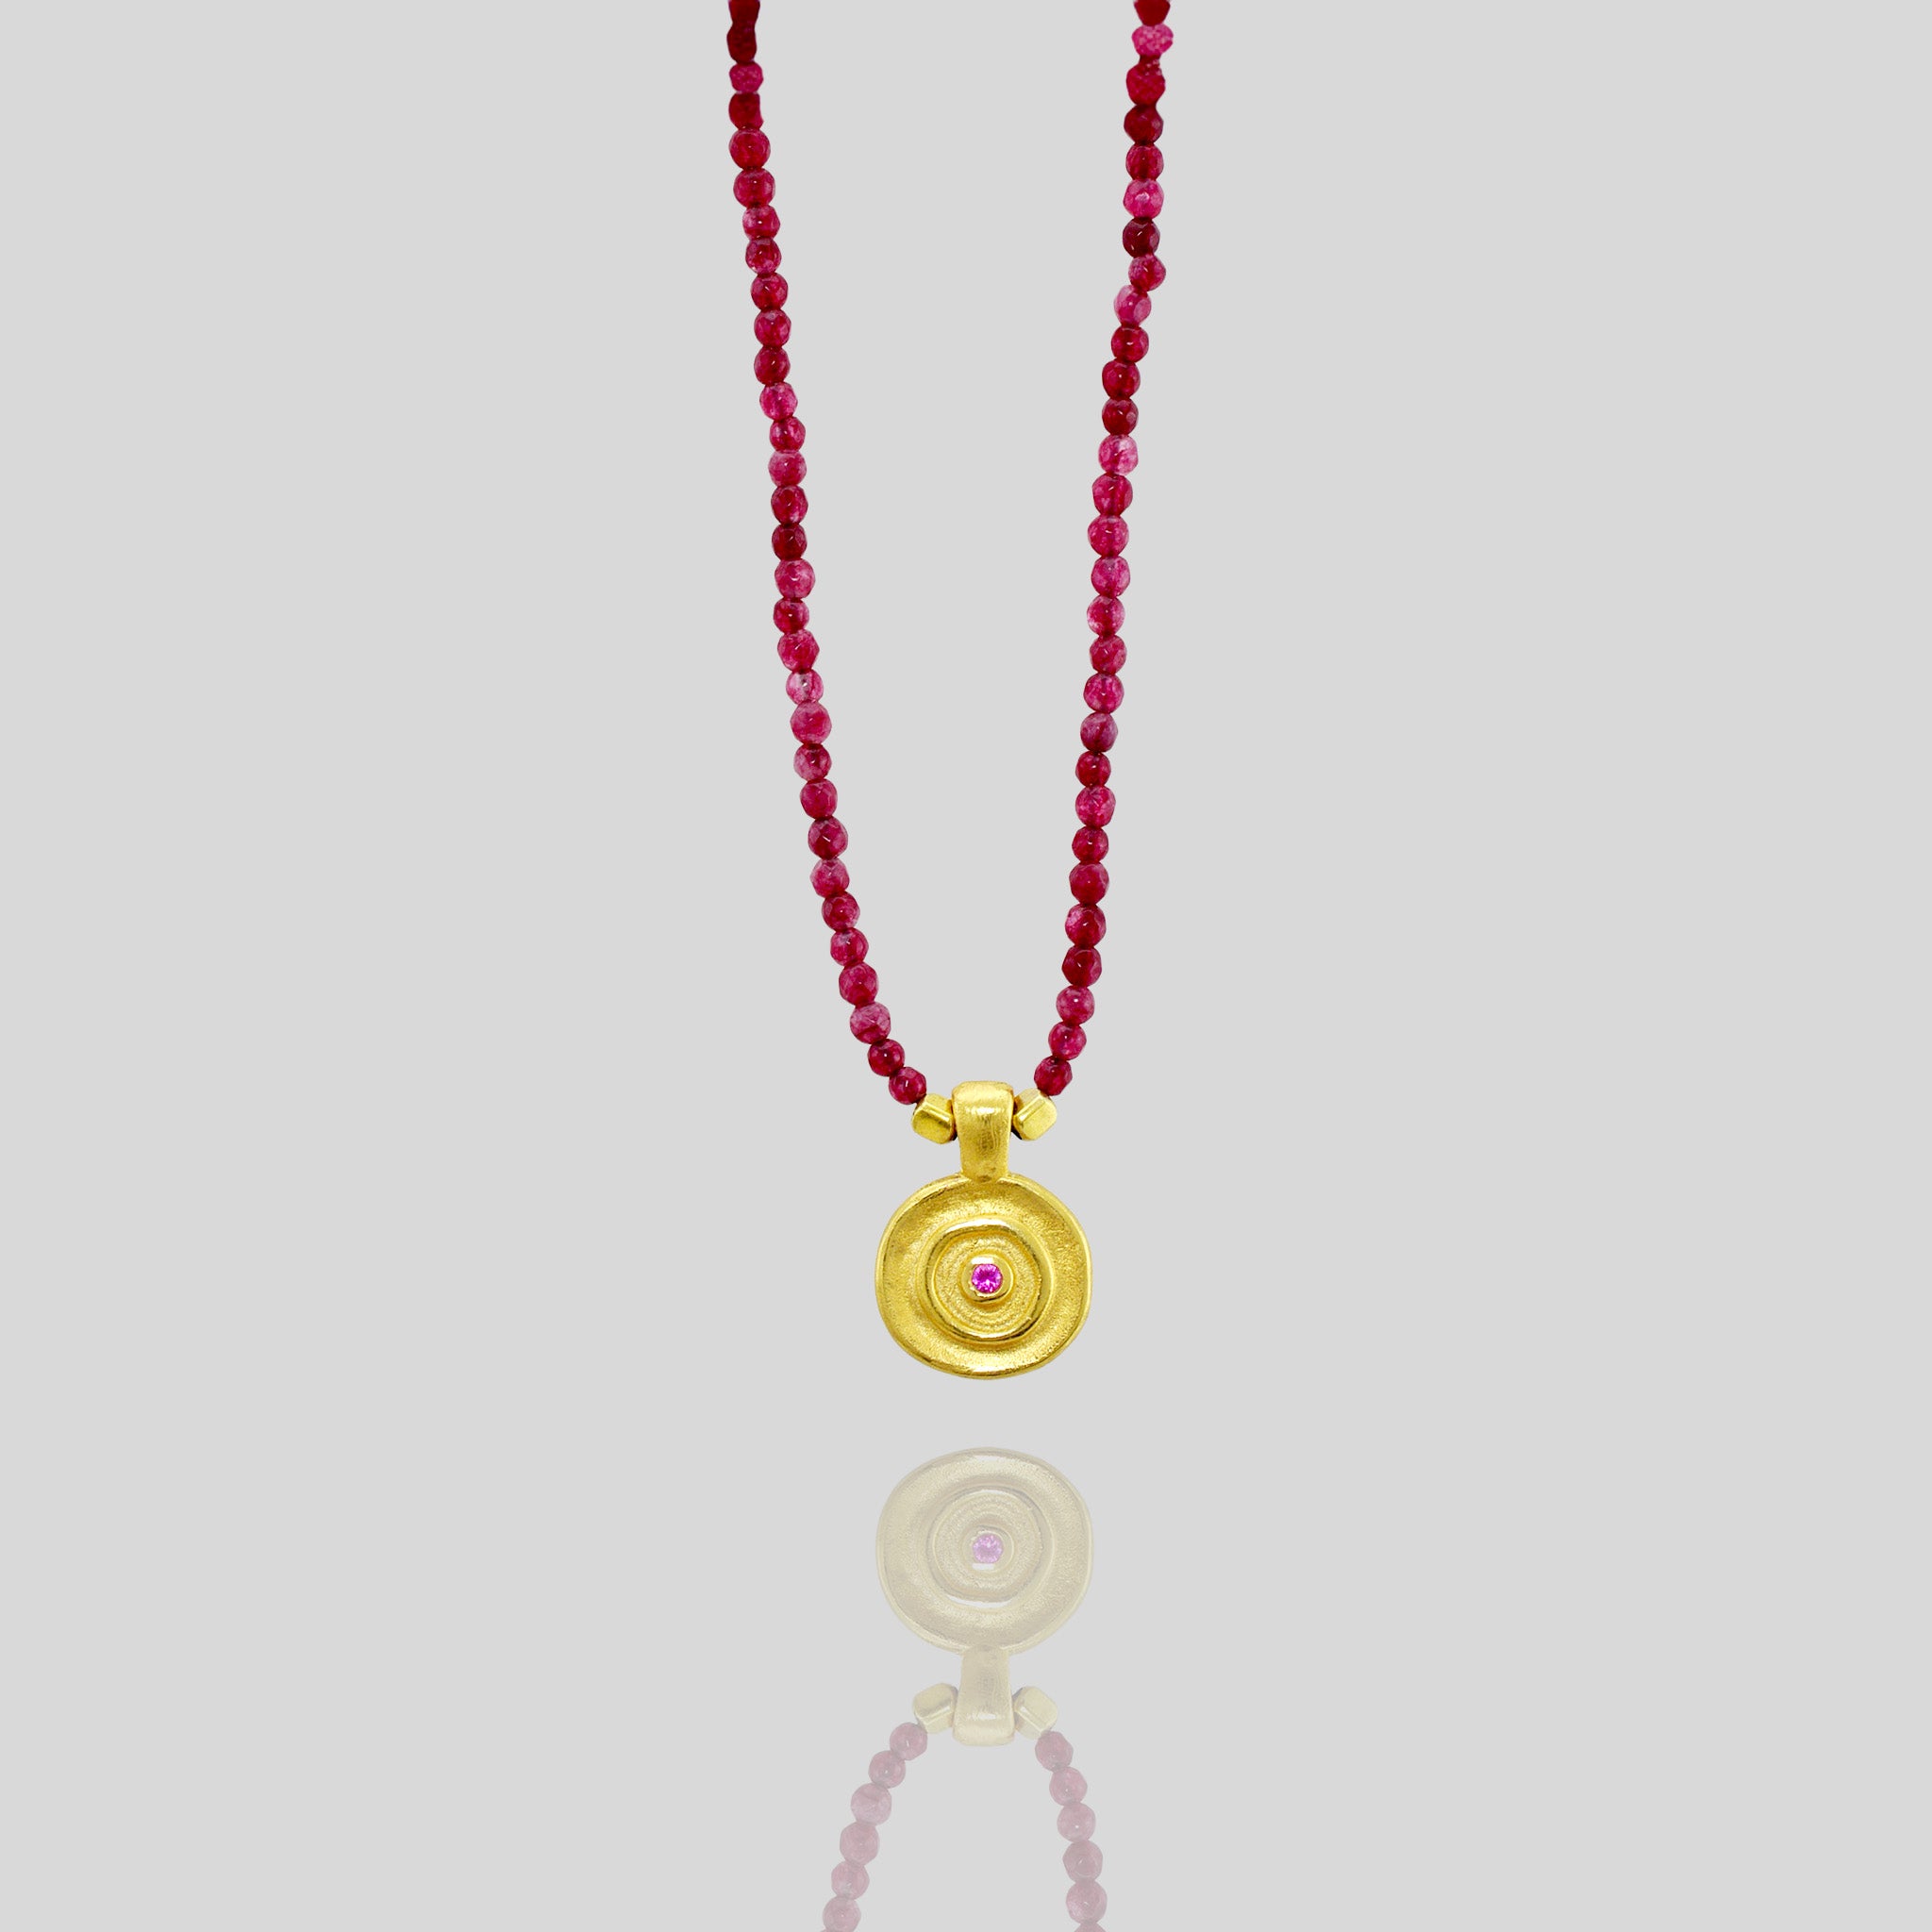 Pharaohs II - Ruby beads with ancient gold element necklace